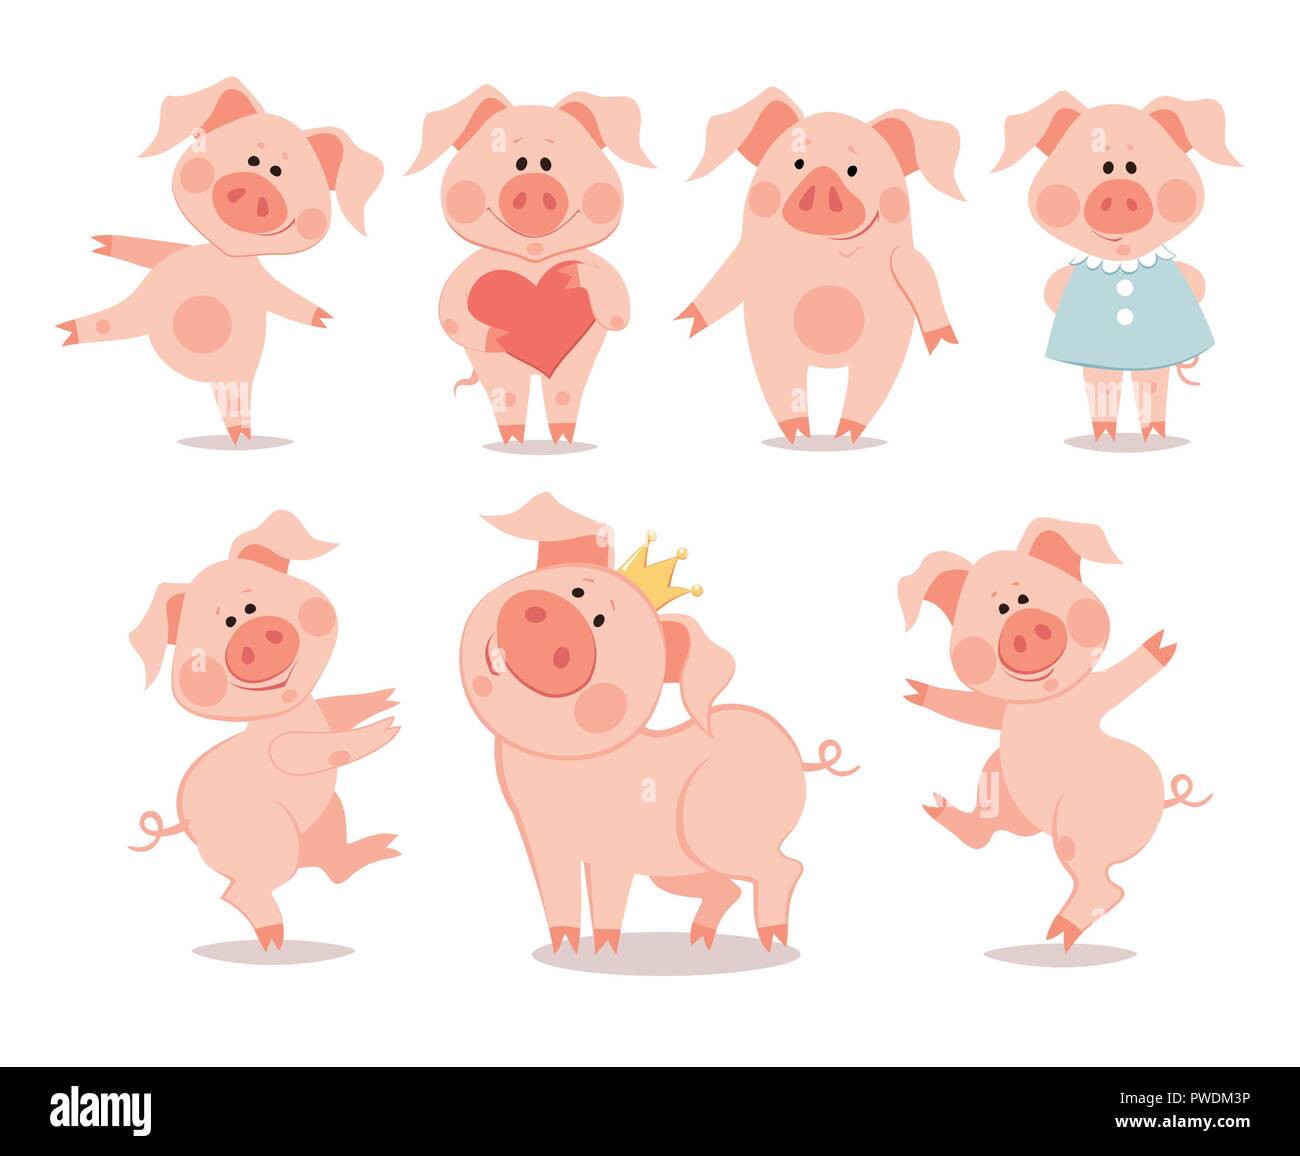 Pig Illustration High Resolution Stock Photography And Images Alamy